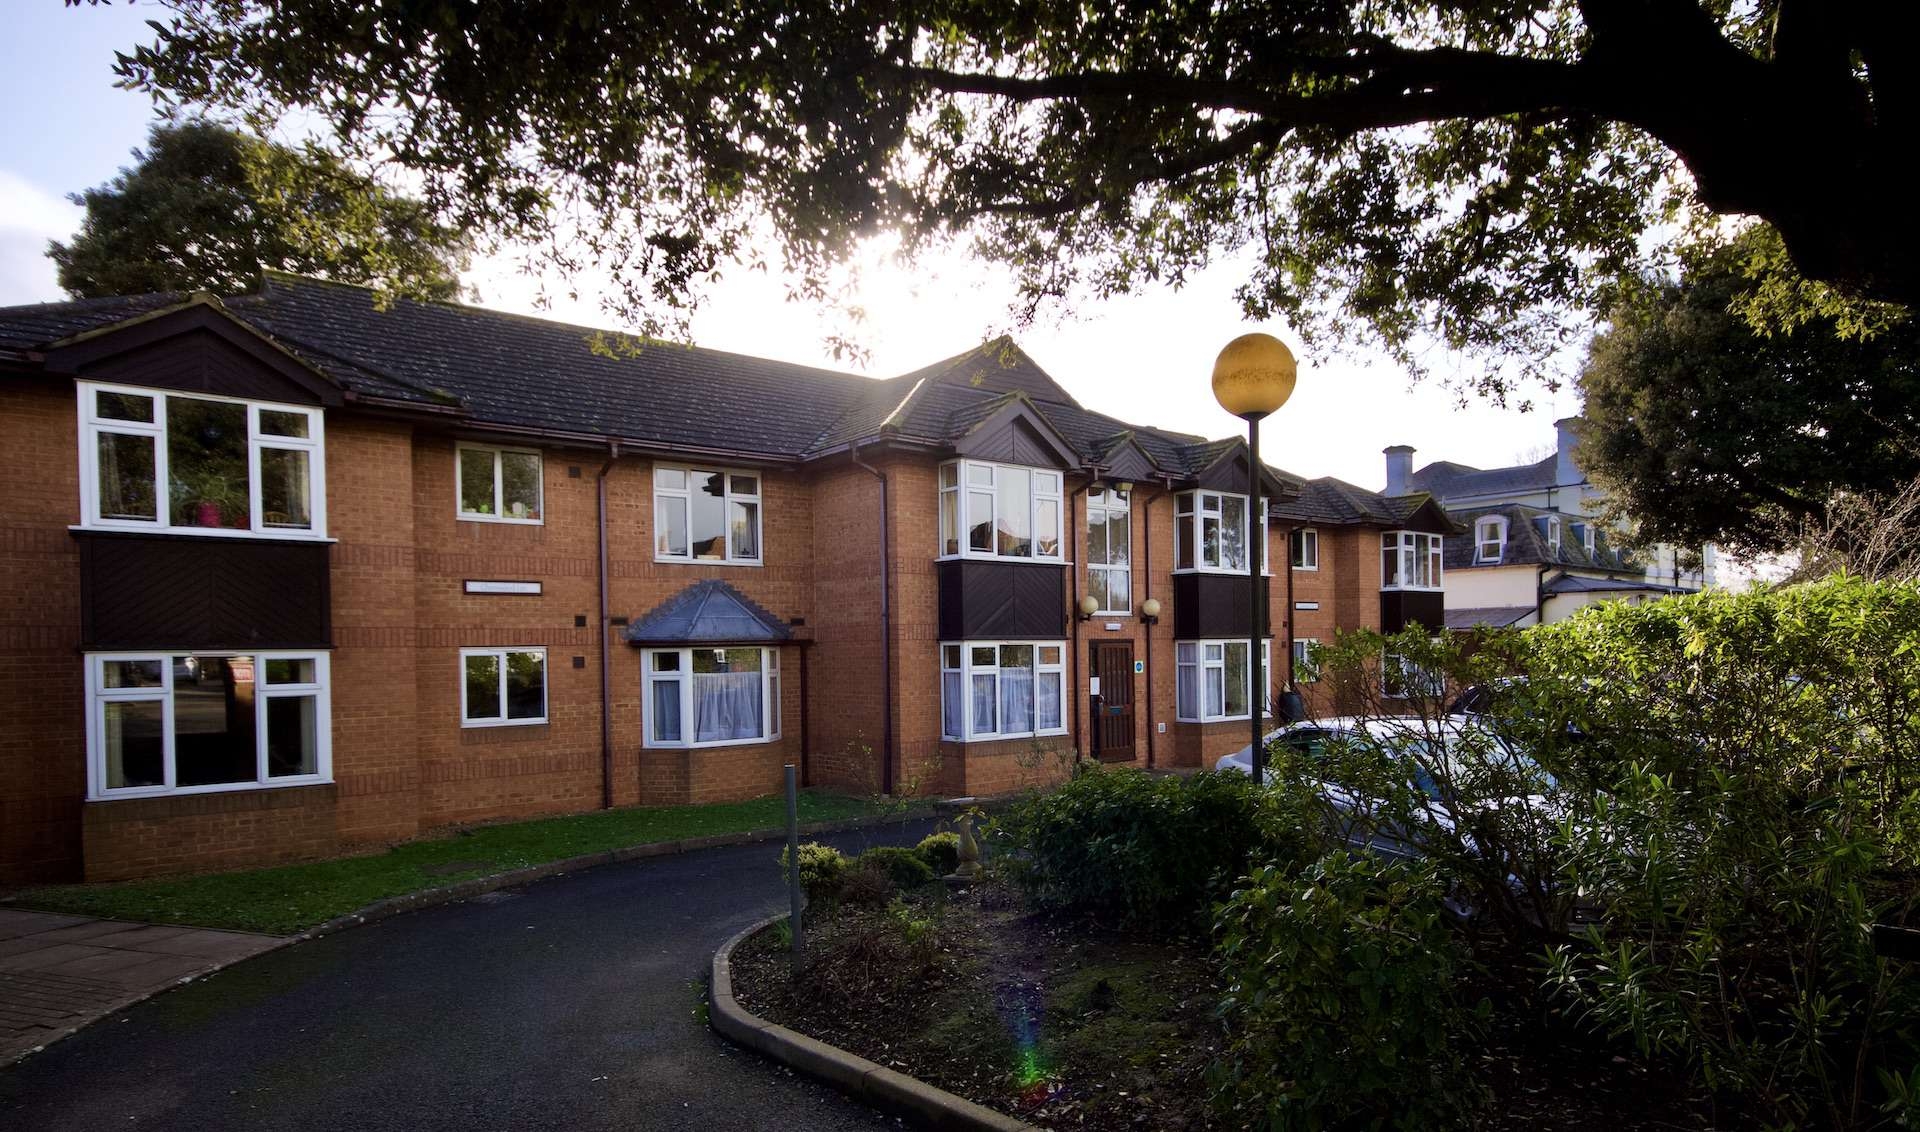 CCH image displaying an outside shot of Chesswood Lea